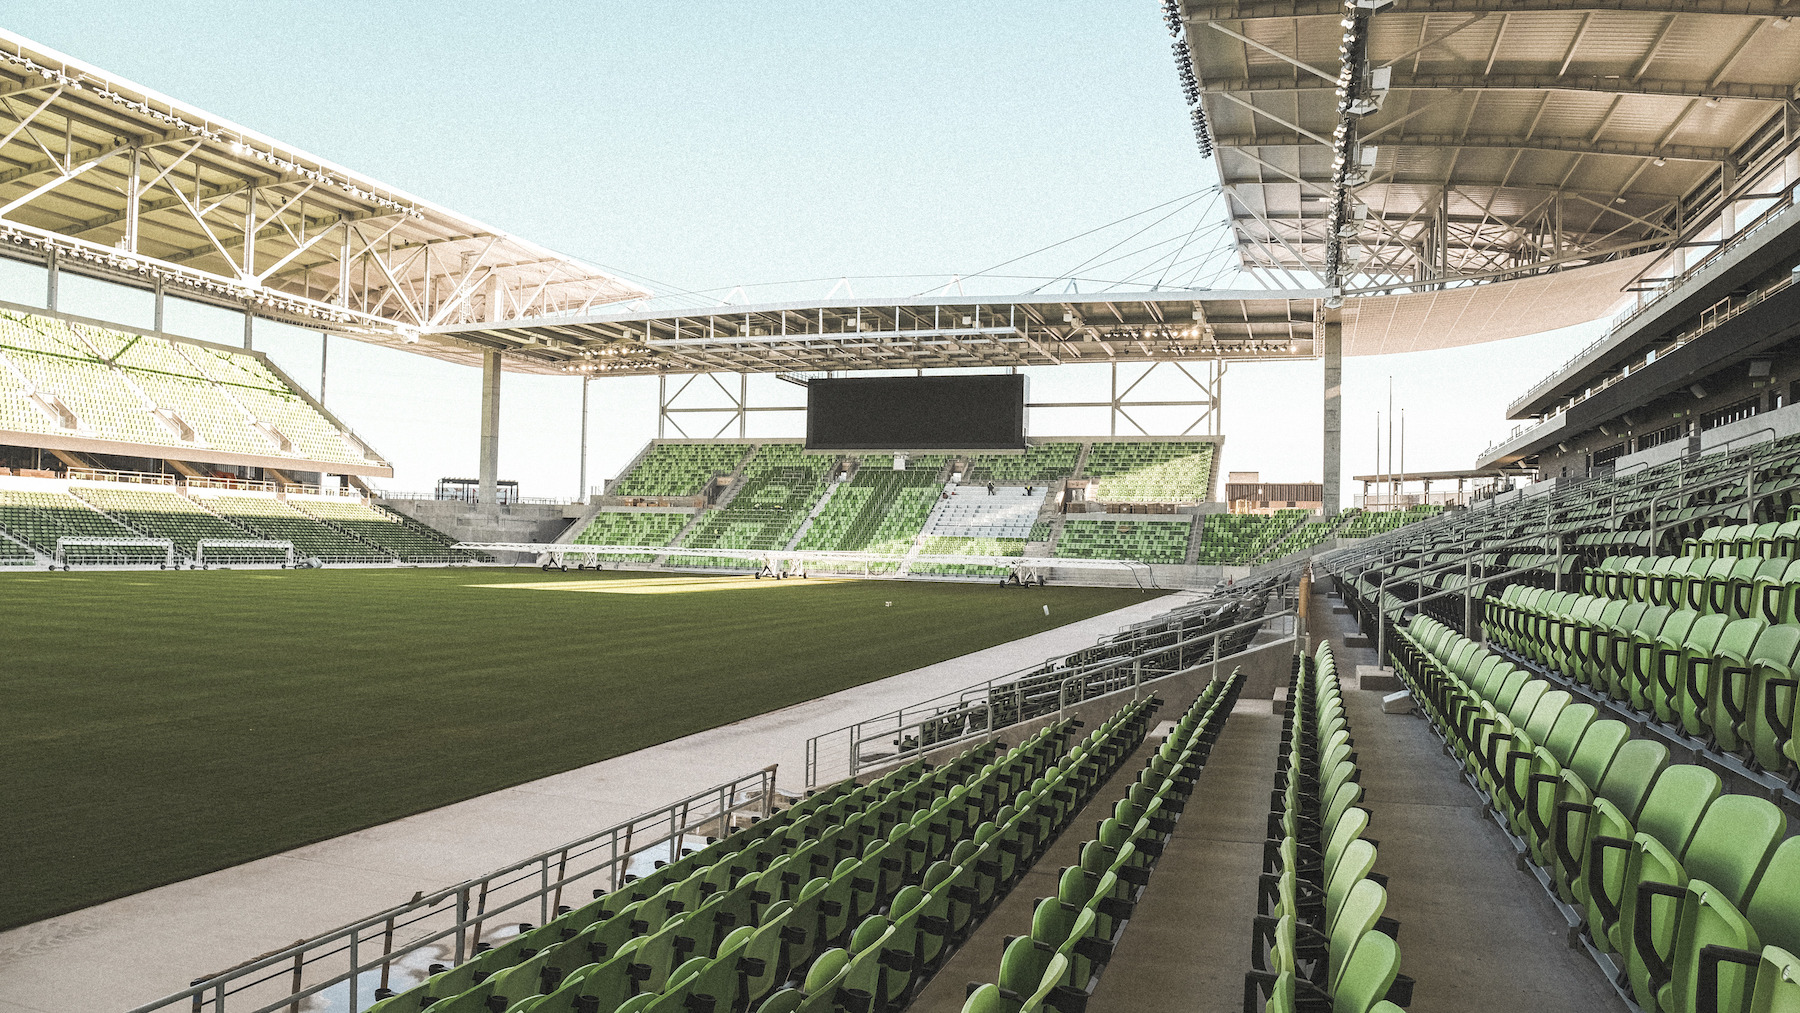 Q2 Stadium, home of Austin FC, is an example of why structural engineers are an important part of the design and construction industry, and represent many of the changes in how the industry works to fuel innovation in the built environment. 